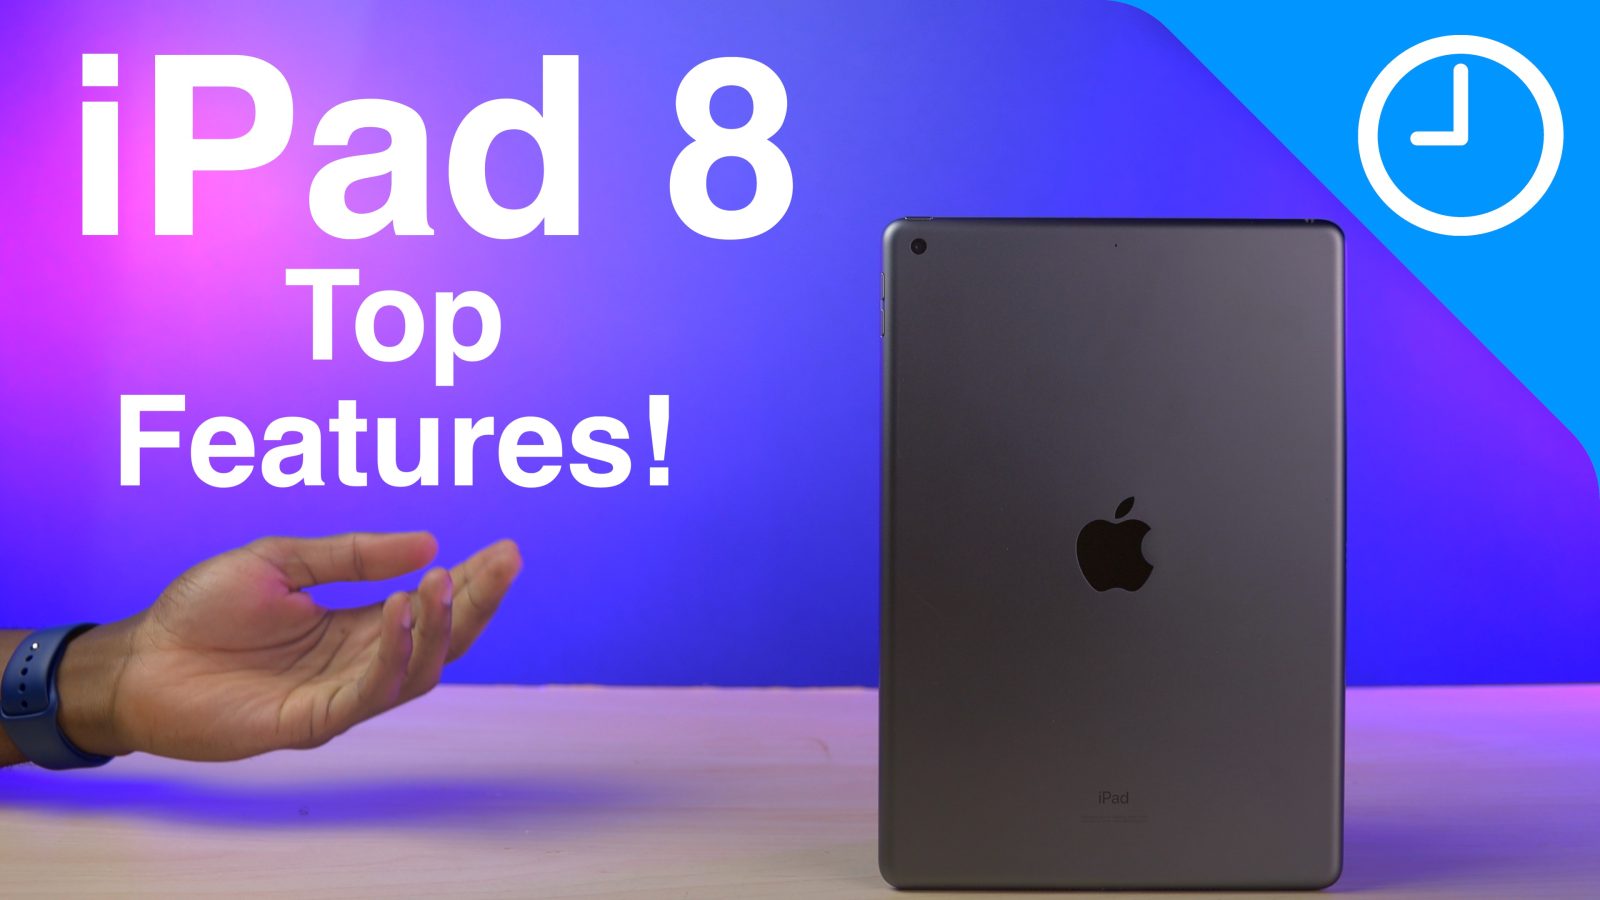 iPad 8 Top Features: The best value iPad gets better [Video] - 9to5Mac